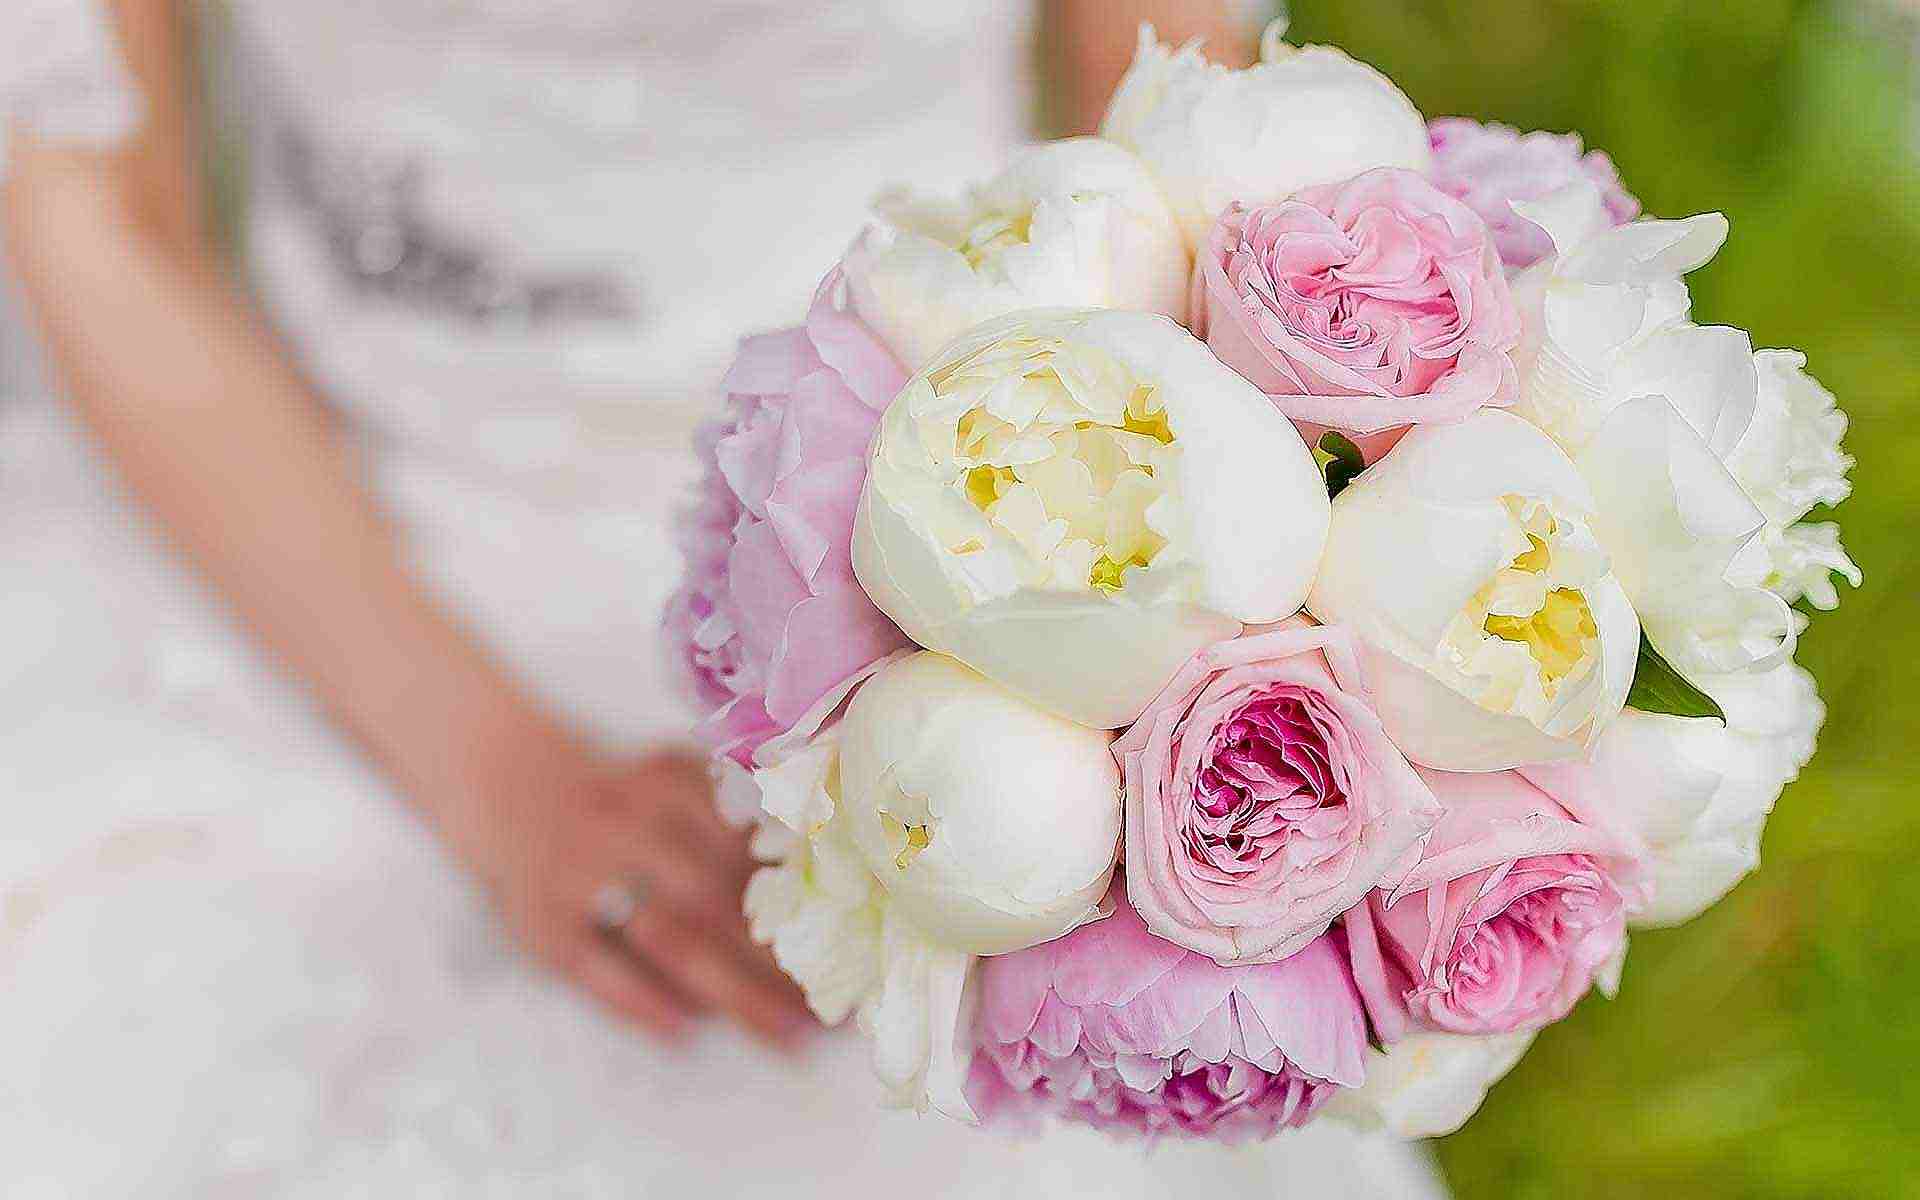 Bursting-Blush-And-White-Ranunculus-Make-For-A-Gorgeous-Bridal-Bouquet